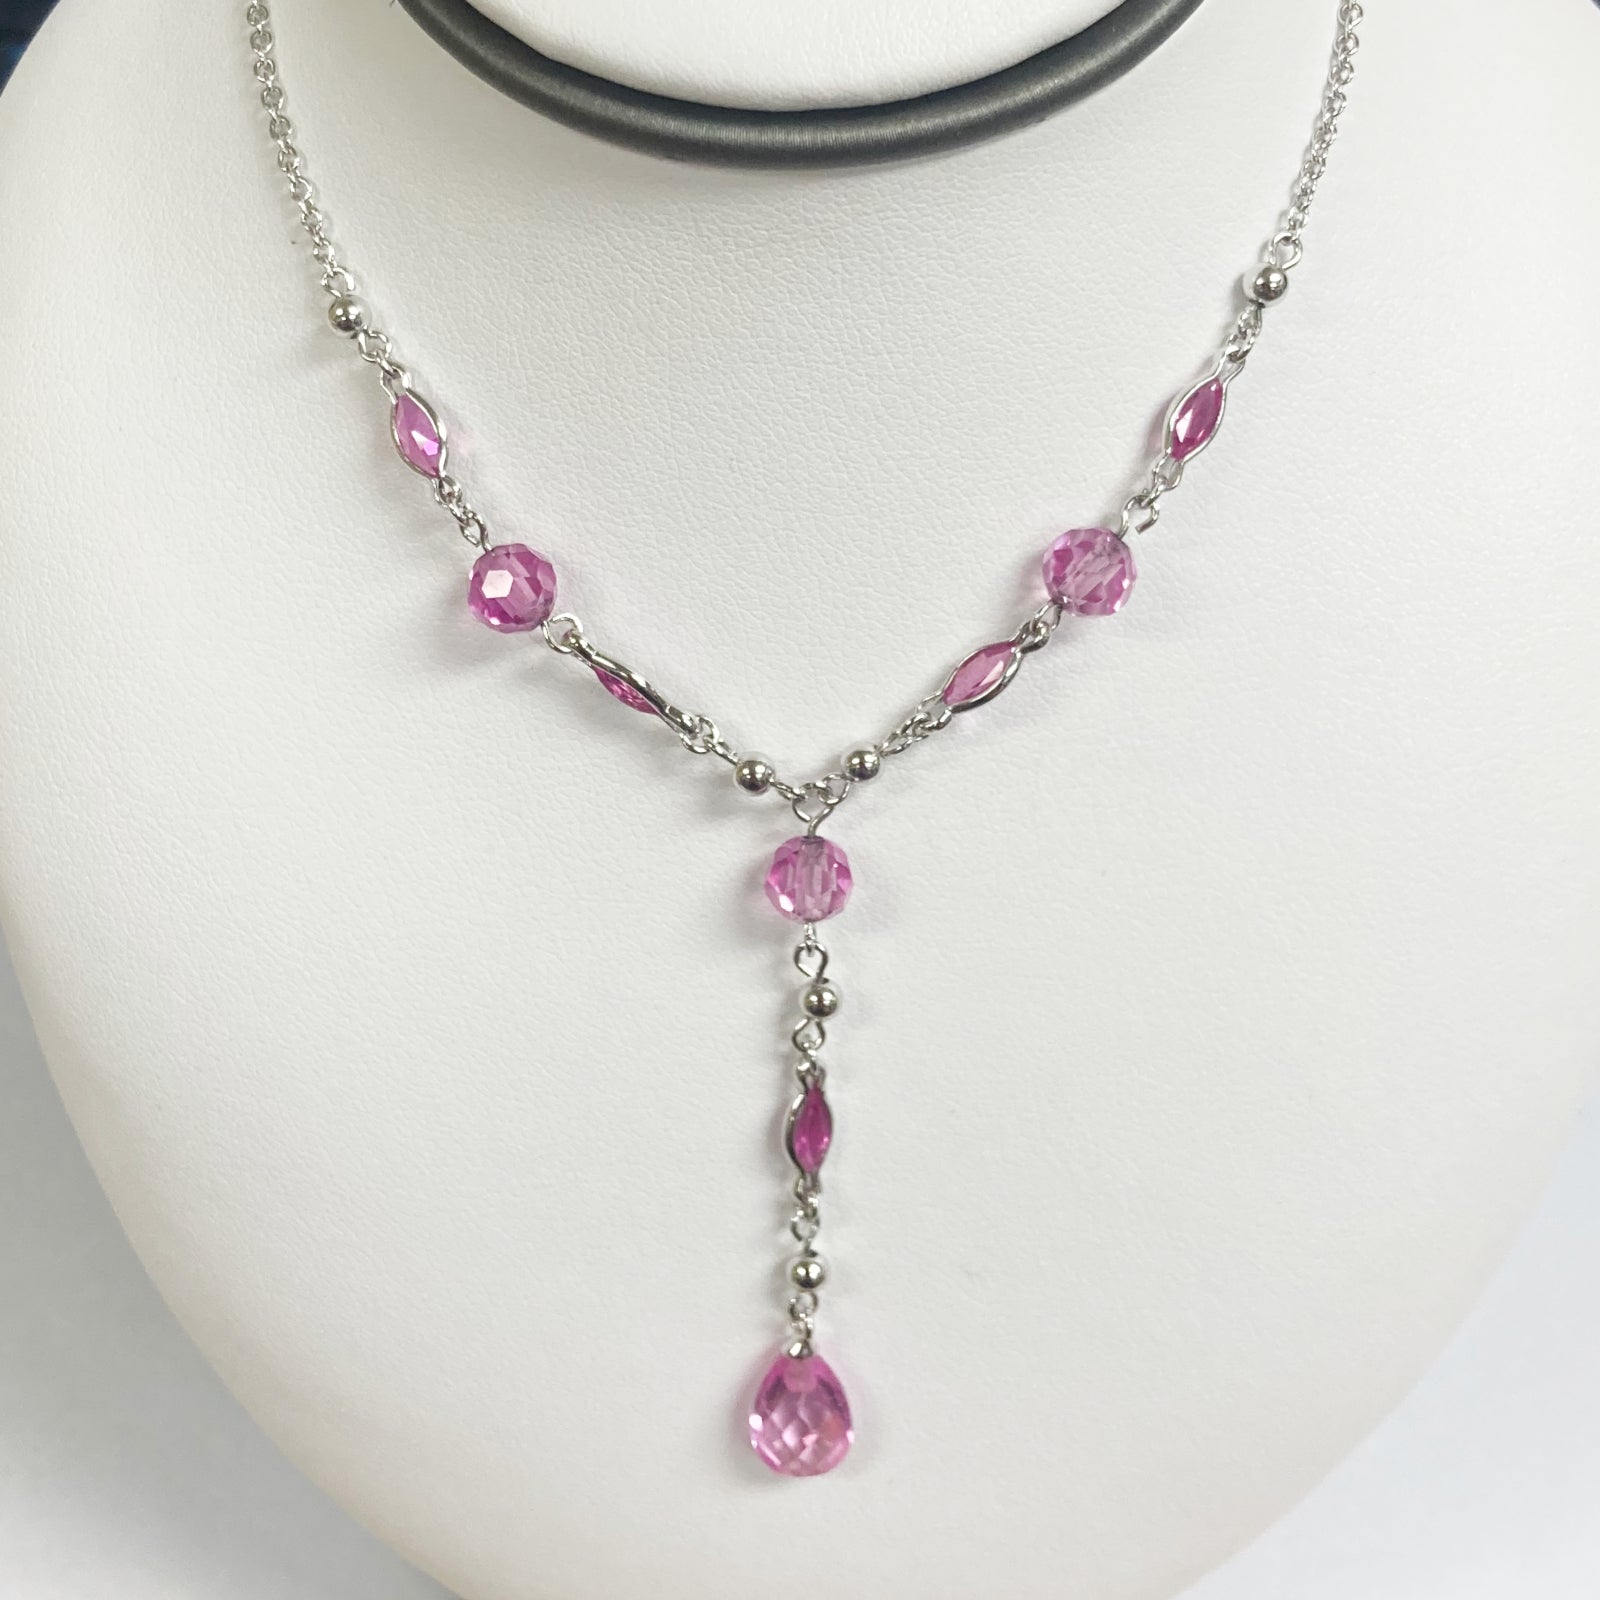 16" Sterling Silver Pink Stone Lariat Necklace